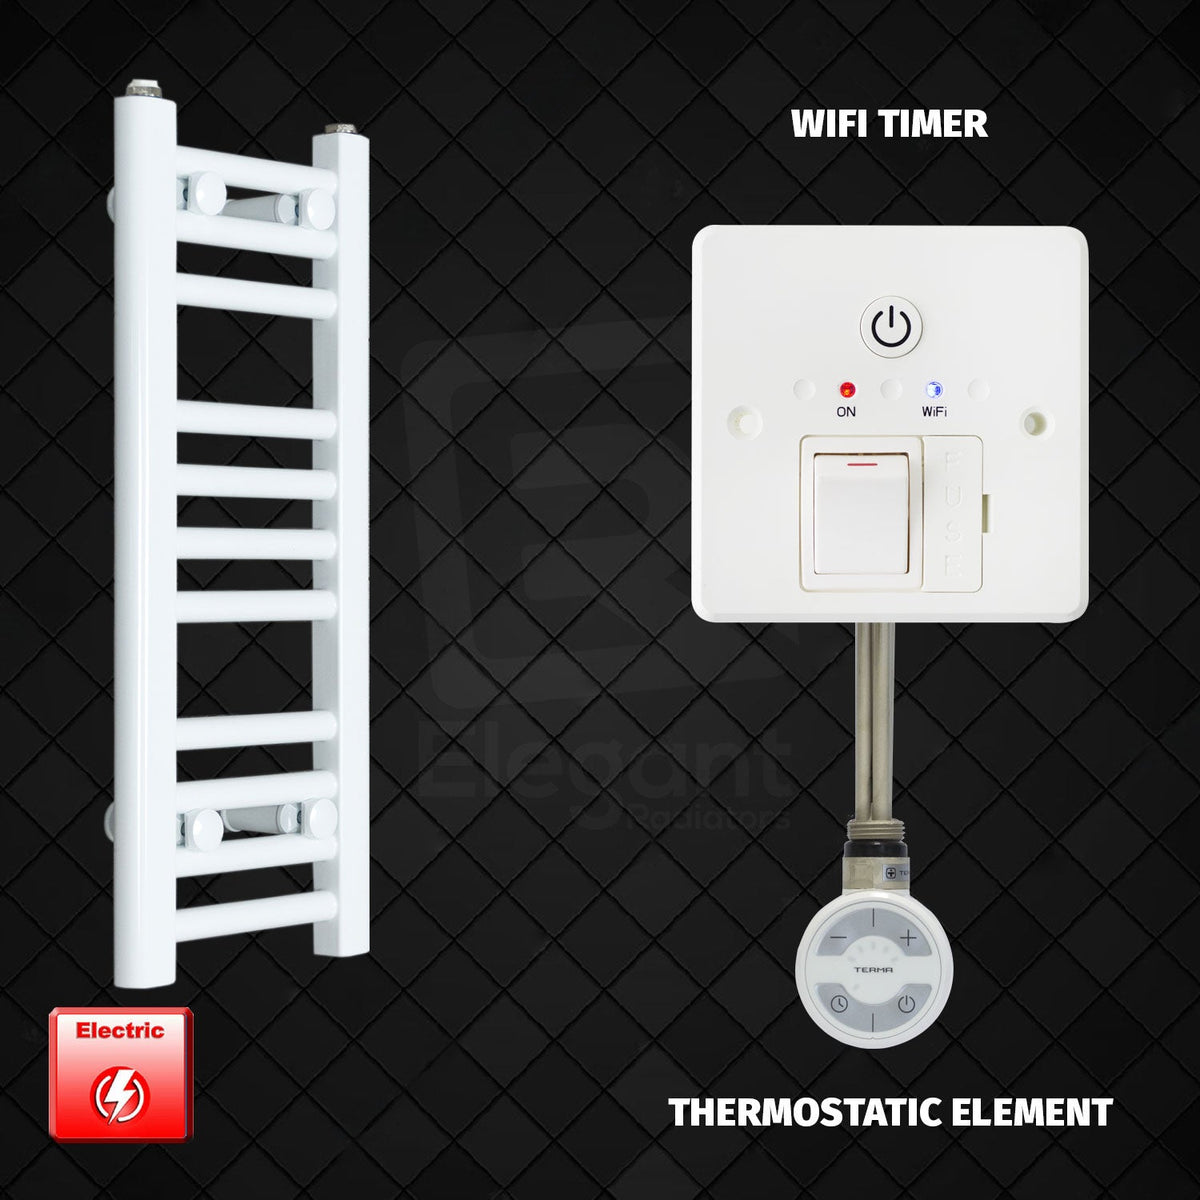 600 x 200 Pre-Filled Electric Heated Towel Radiator White HTR Moa Wifi Timer Thermostatic Element